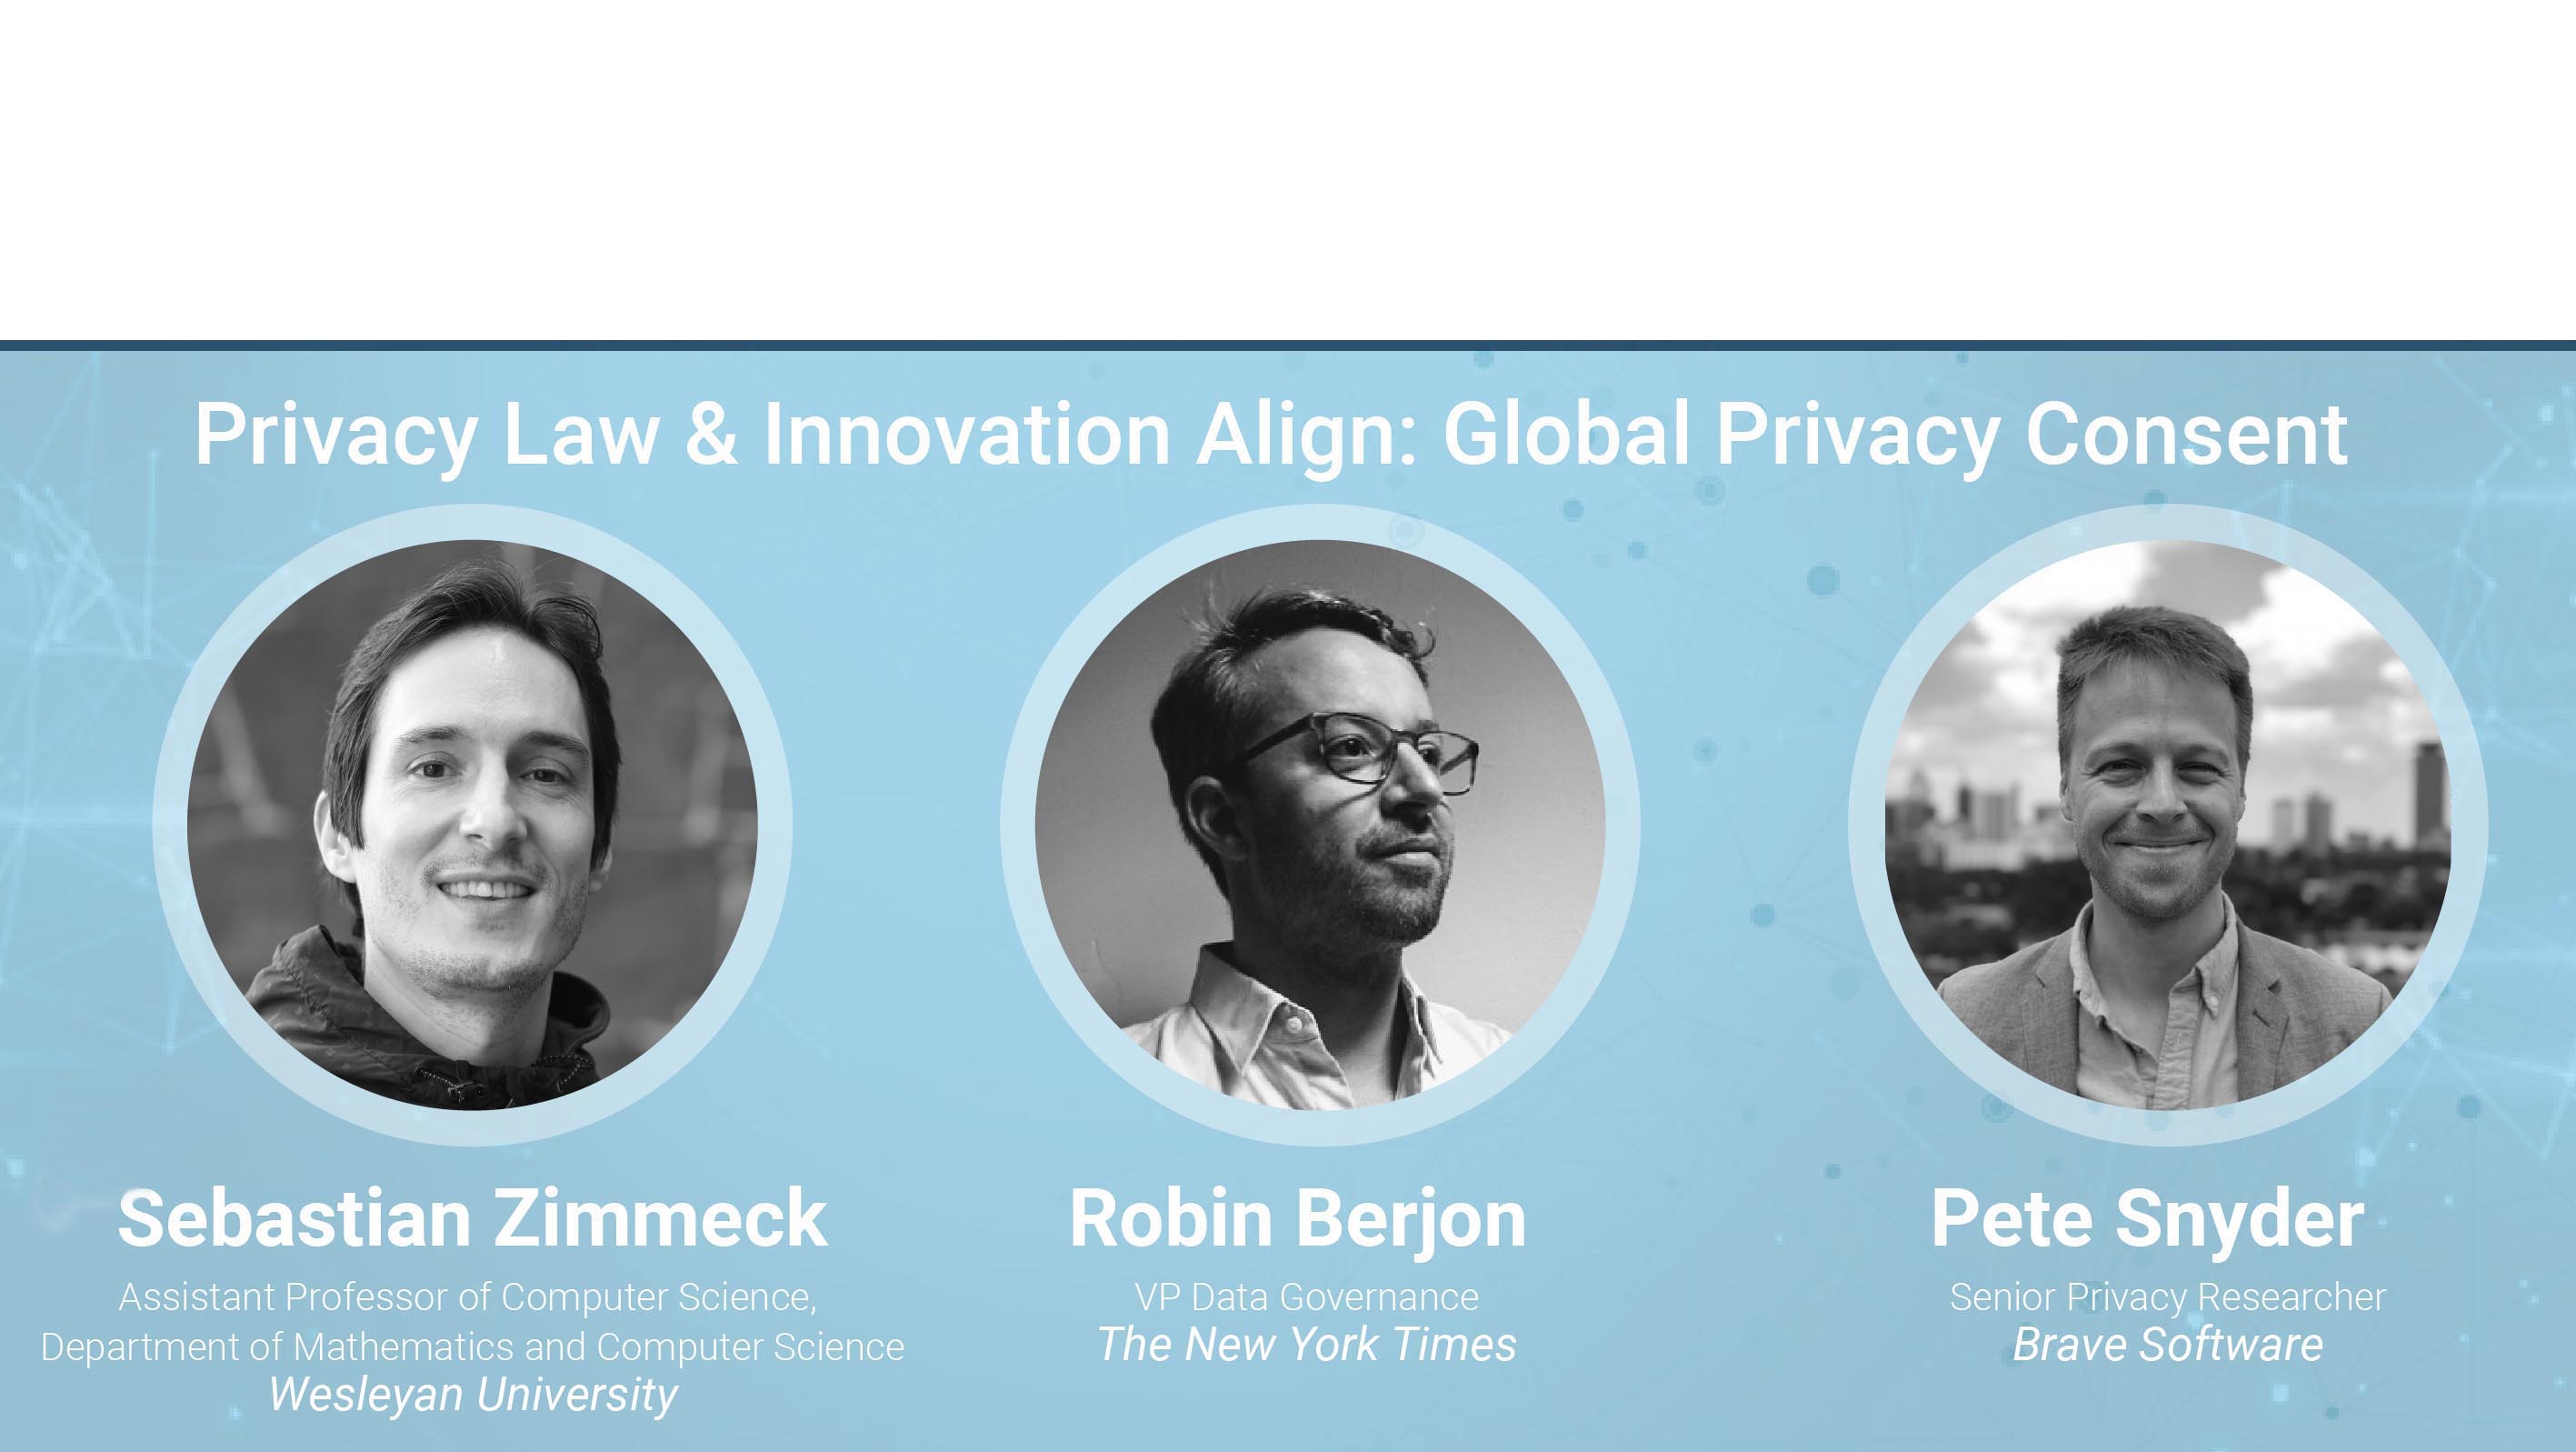 Announcement of Rise of Privacy Tech event showing pictures of Sebastian Zimmeck, Robin Berjon, and Pete Snyder.